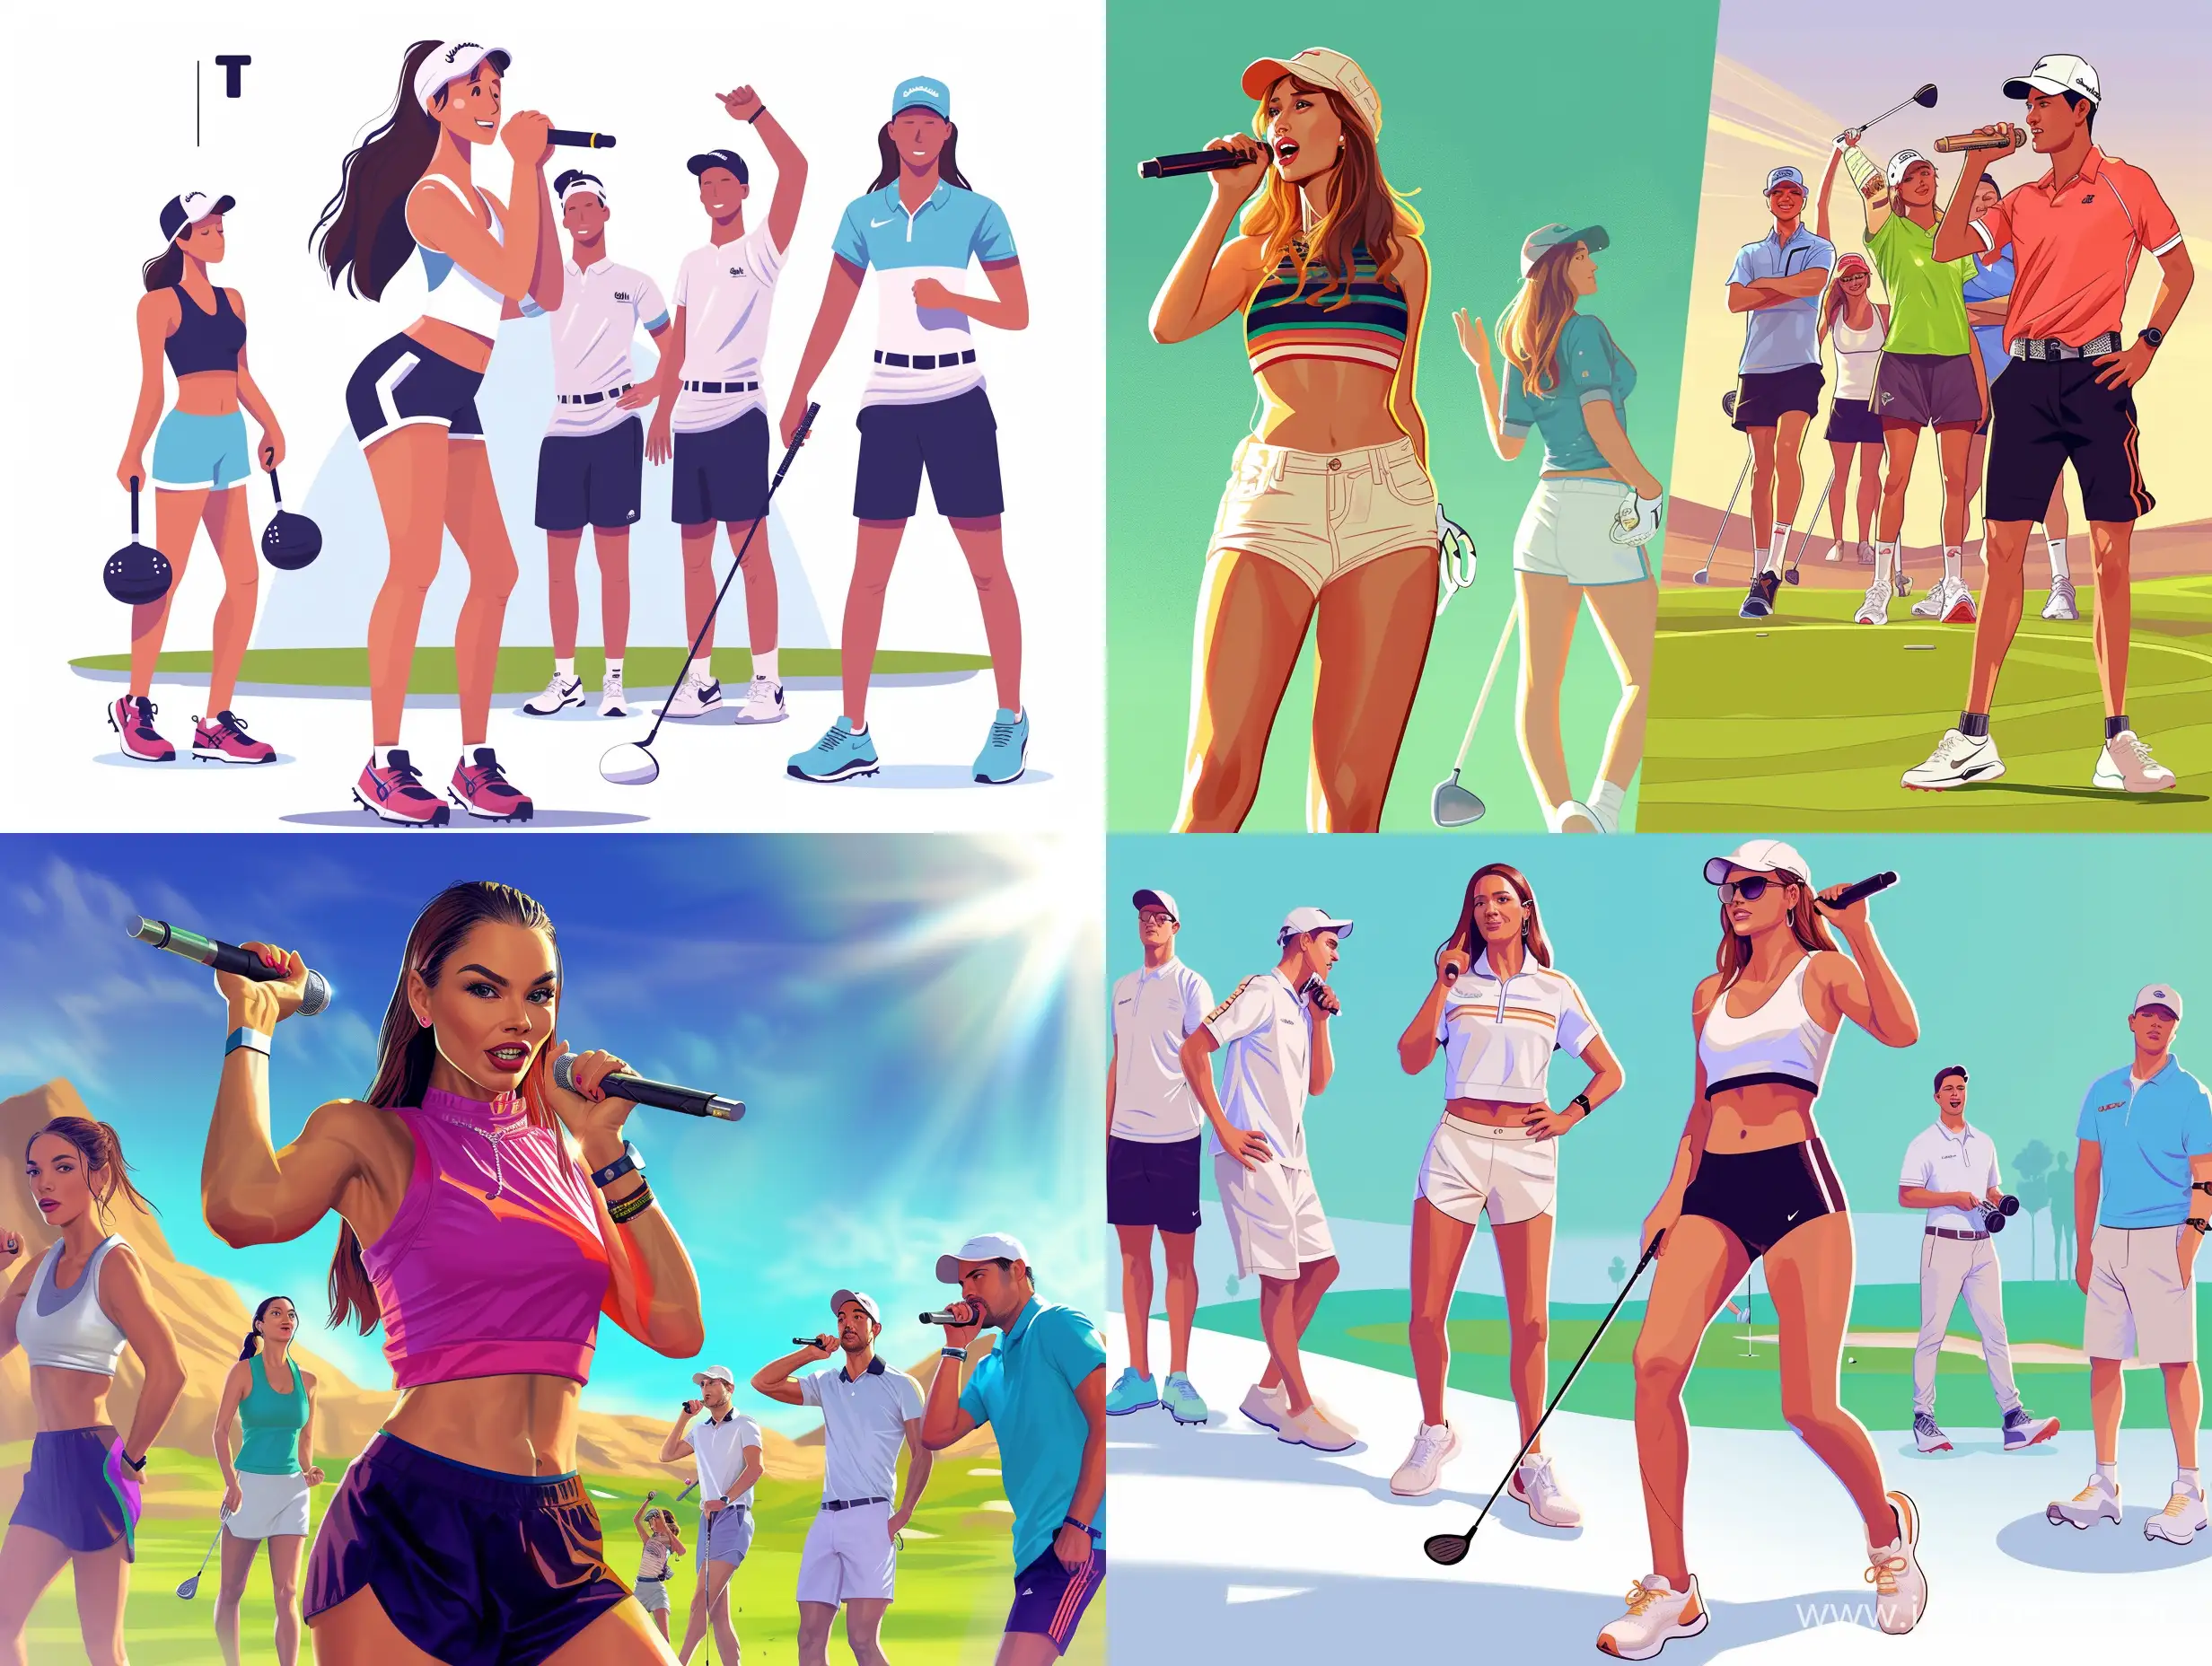 creat an image of a female streamer,a female singer,amale exercising influencer and a group of golfers recodring themselves